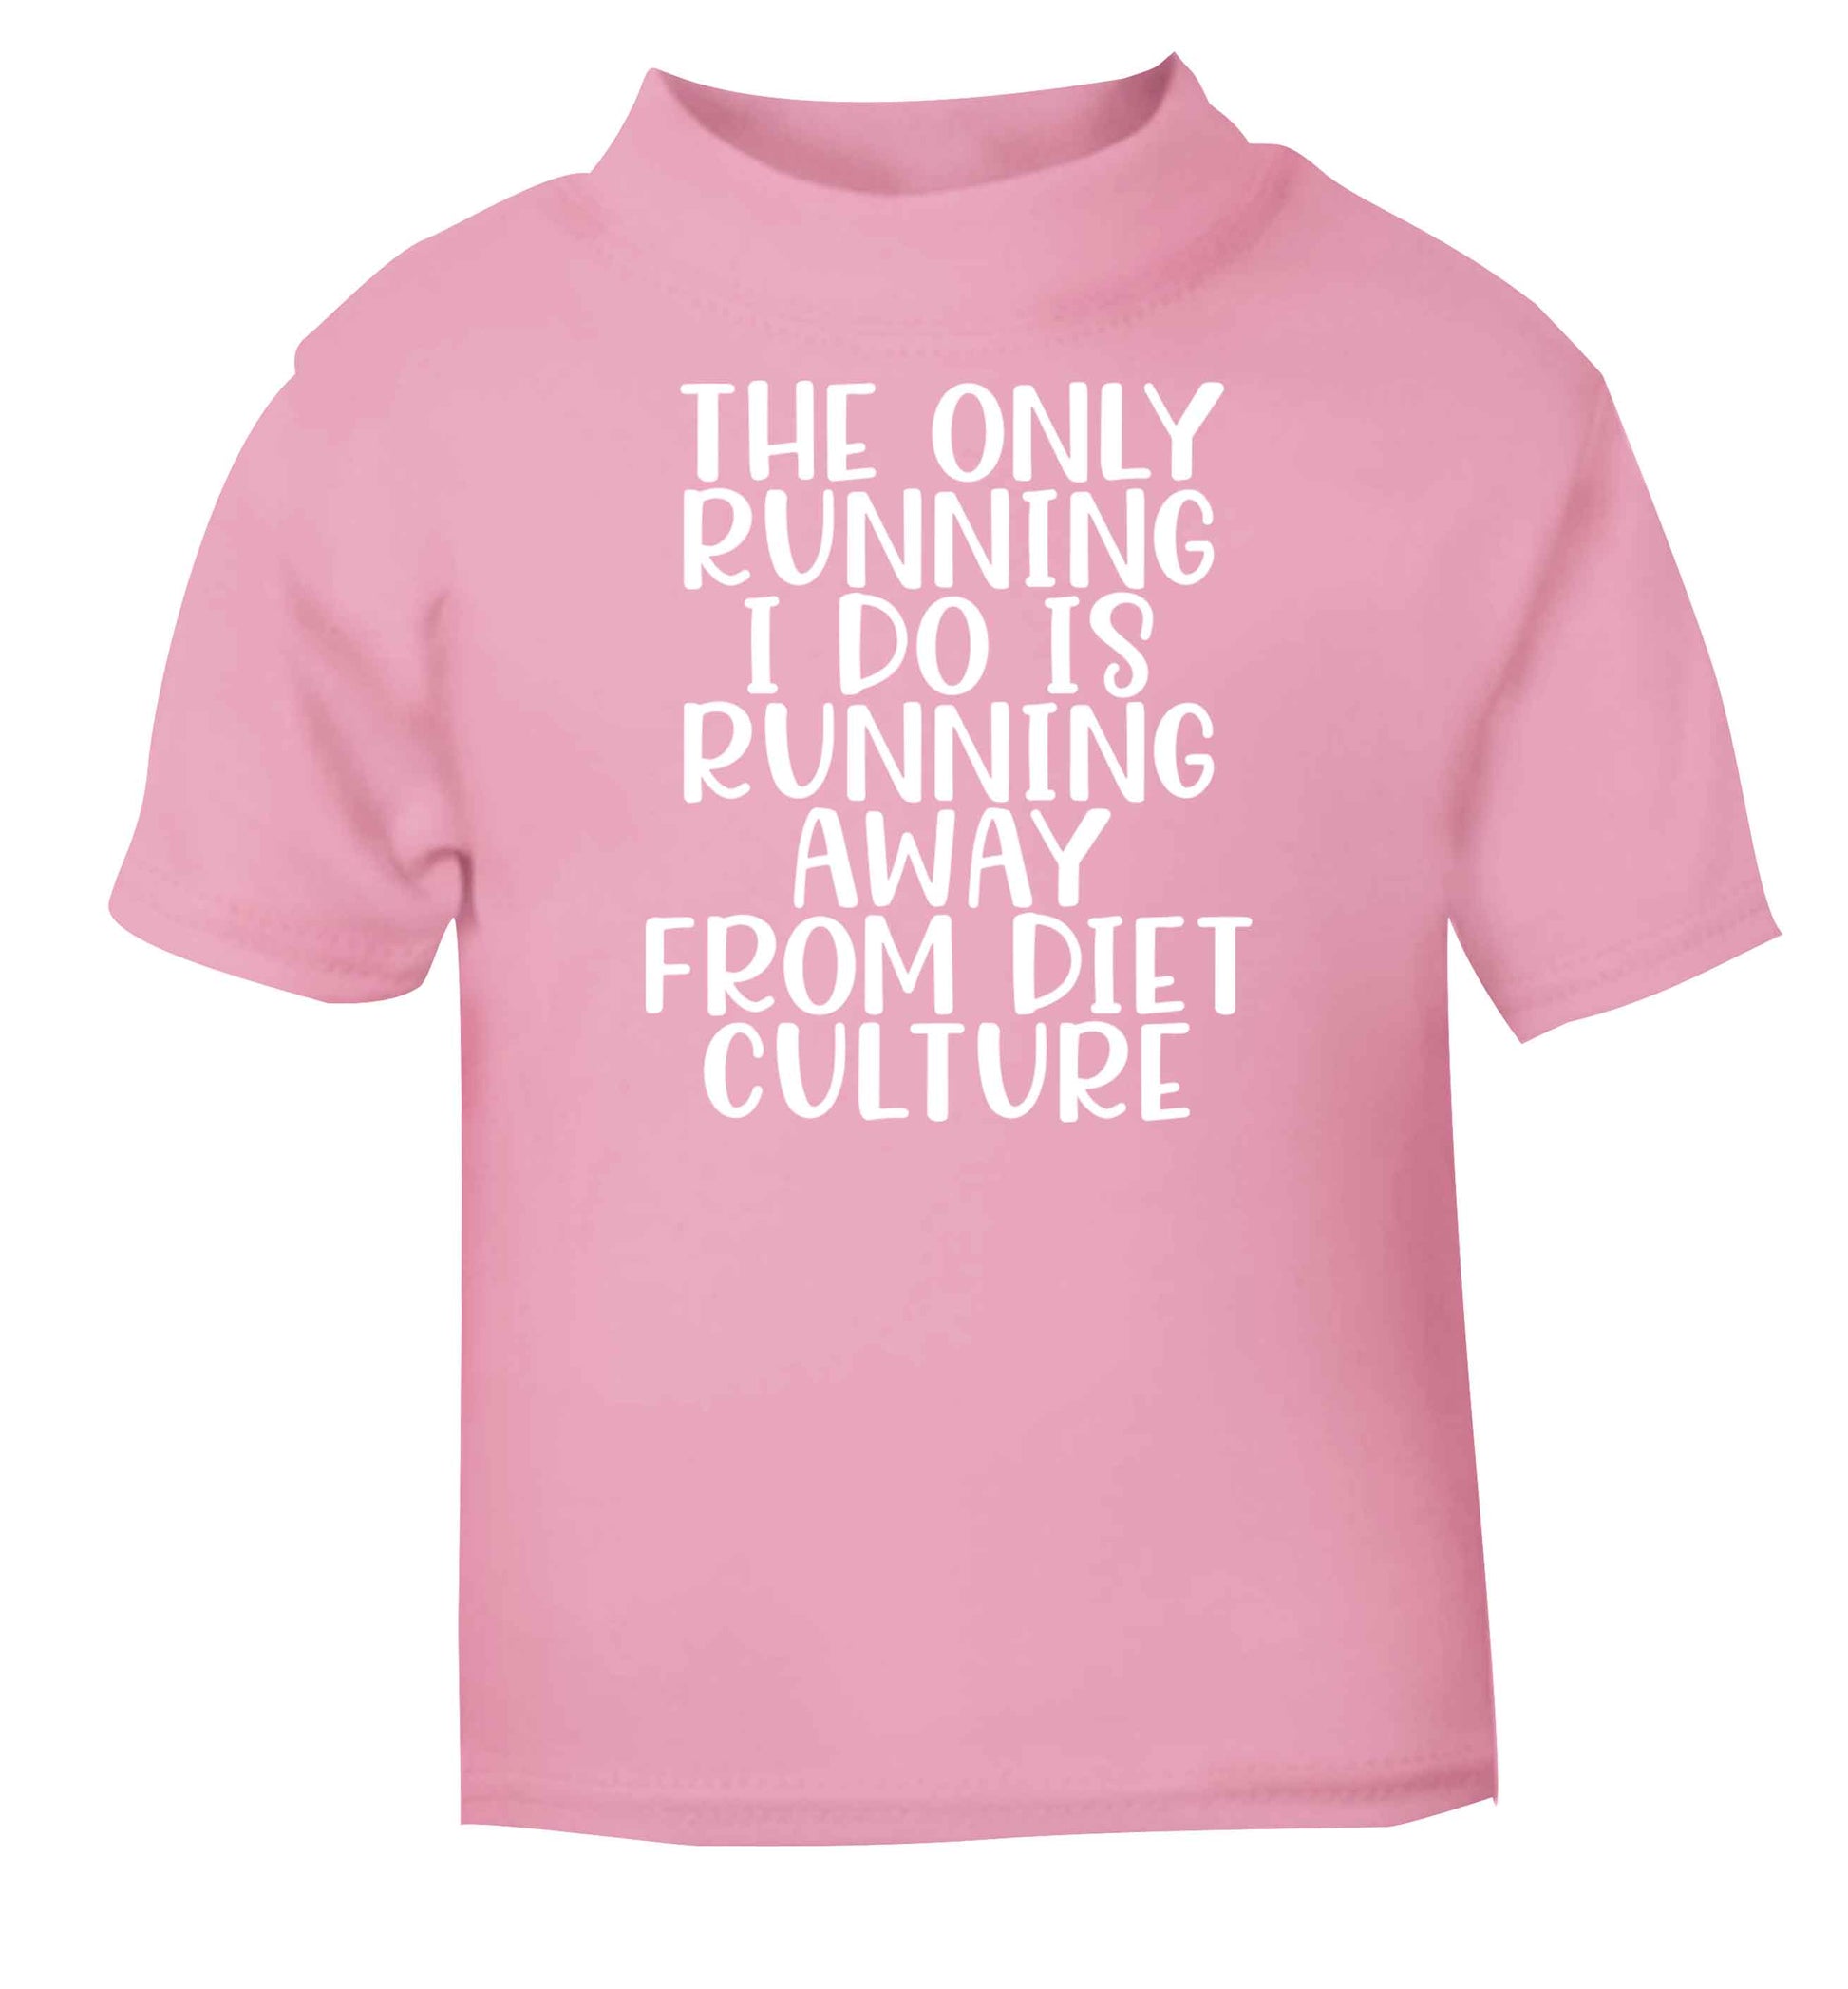 The only running I do is running away from diet culture light pink baby toddler Tshirt 2 Years